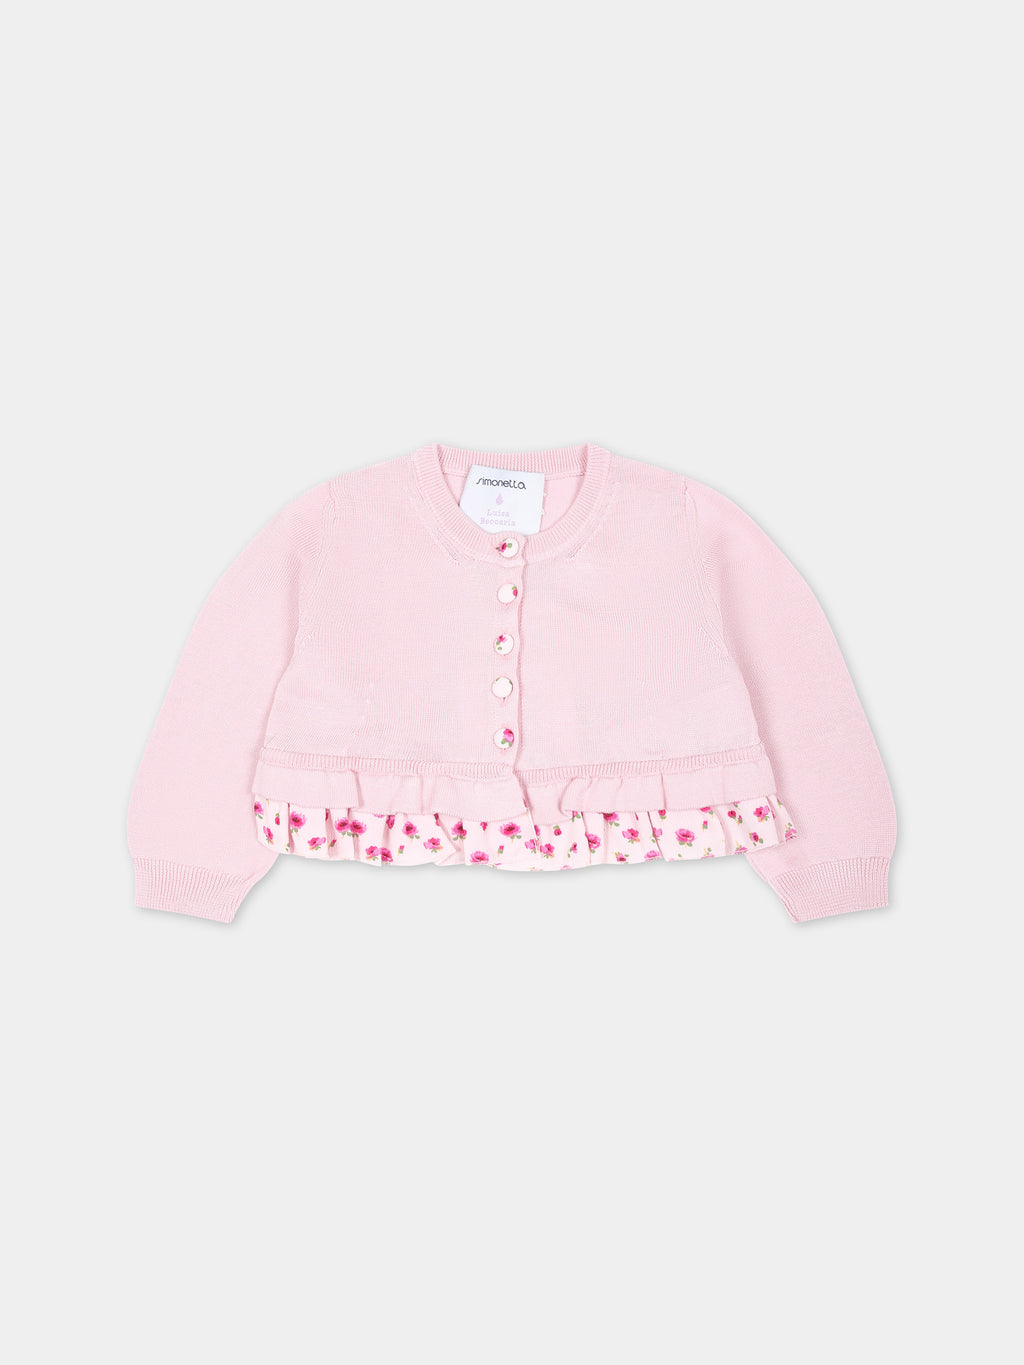 Pink cardigan for baby girl with flowers print